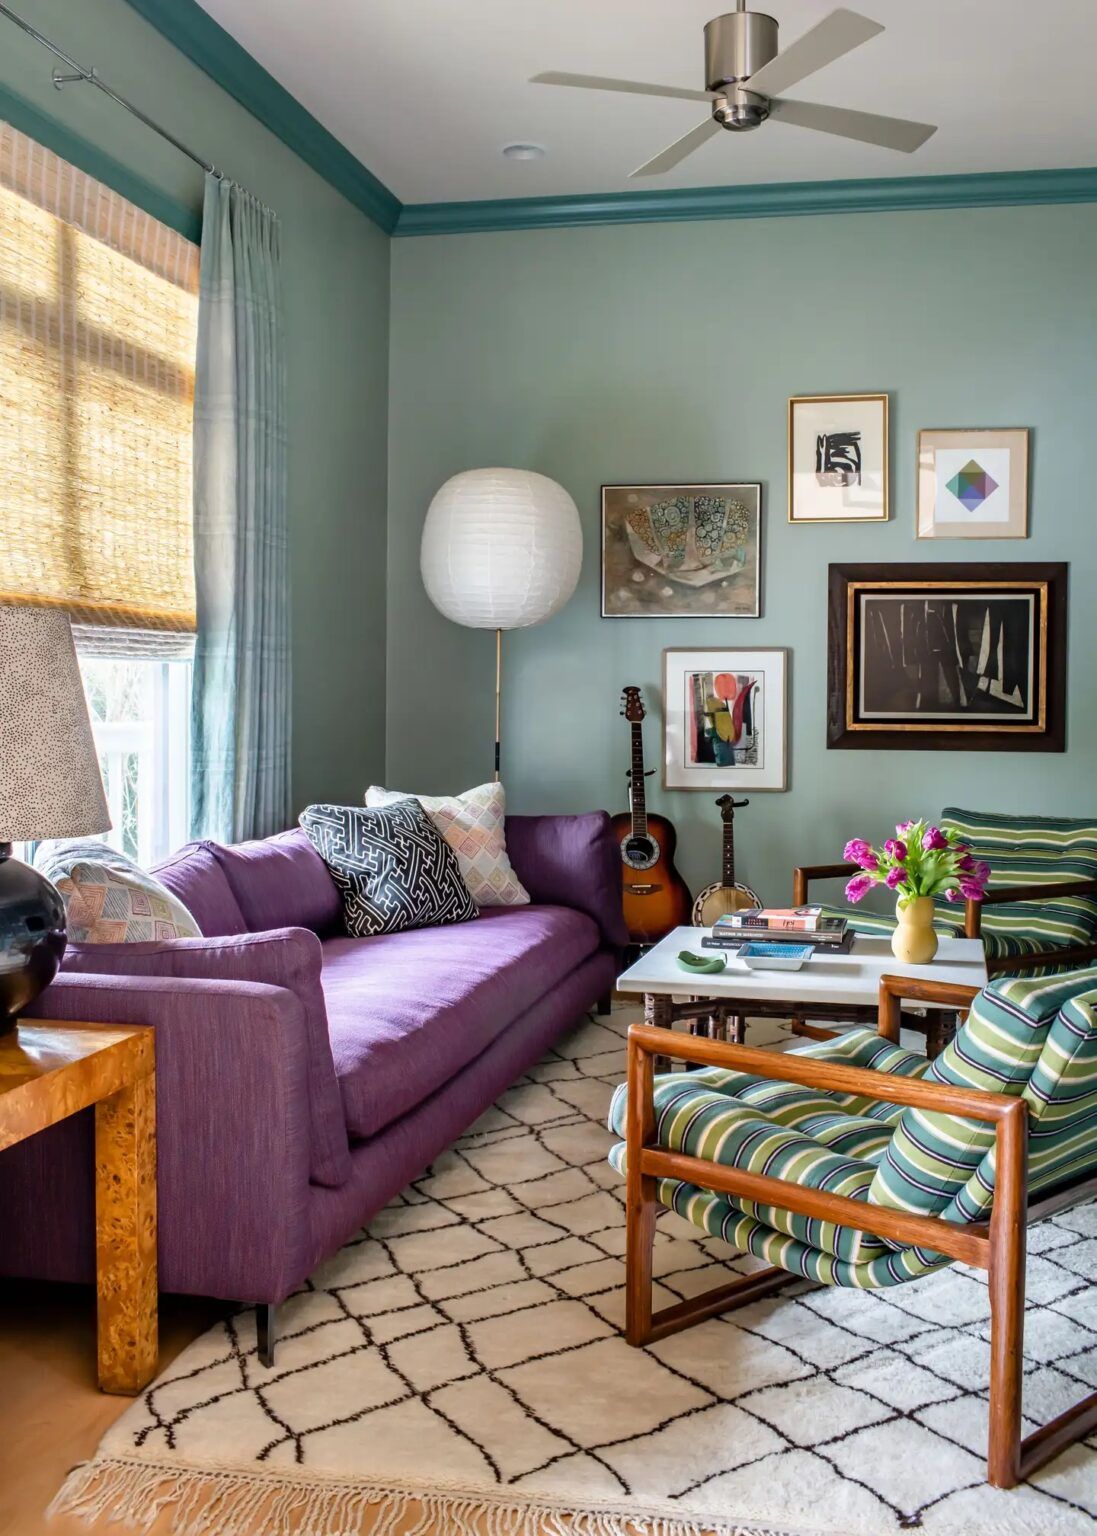 How to Mix Patterns and Prints Like an Interior Design Expert - The Study